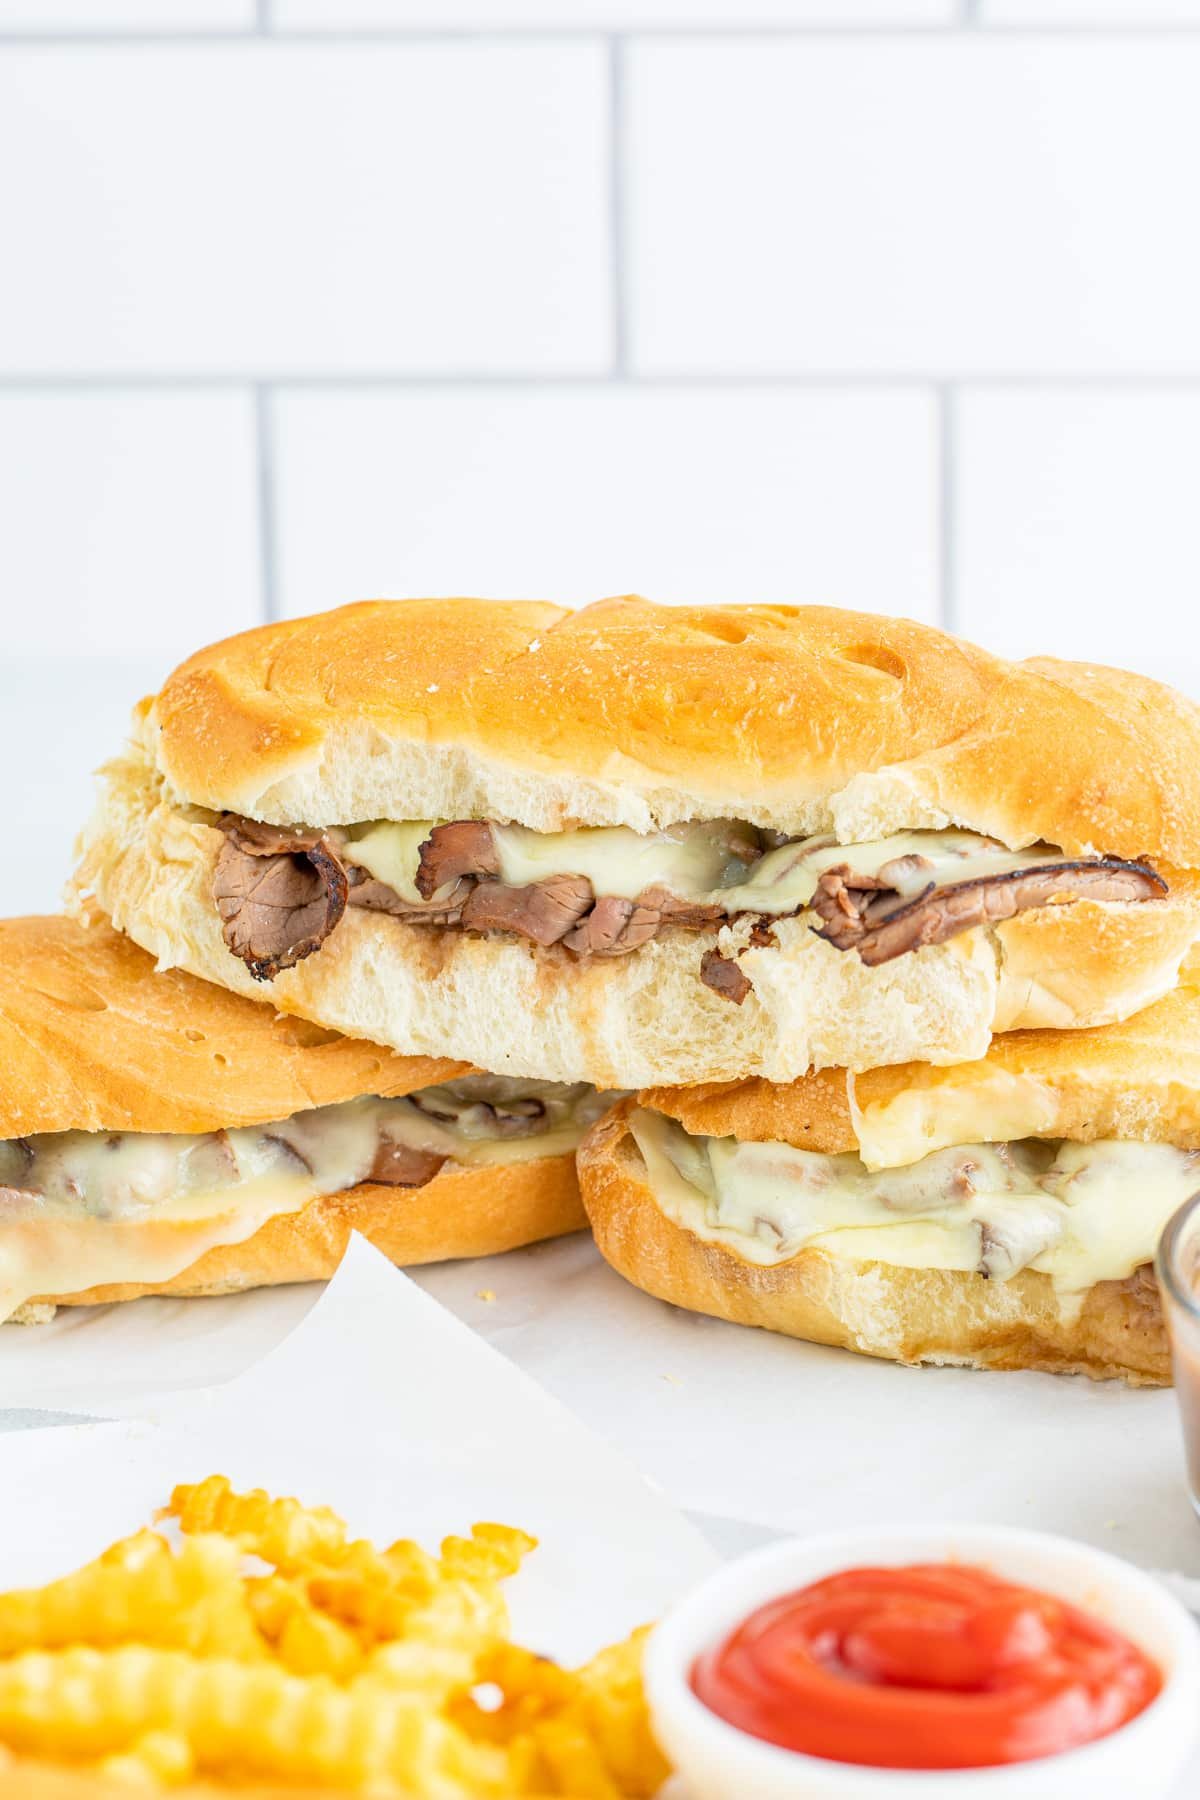 french dipped sandwich recipe stacked on top of each other